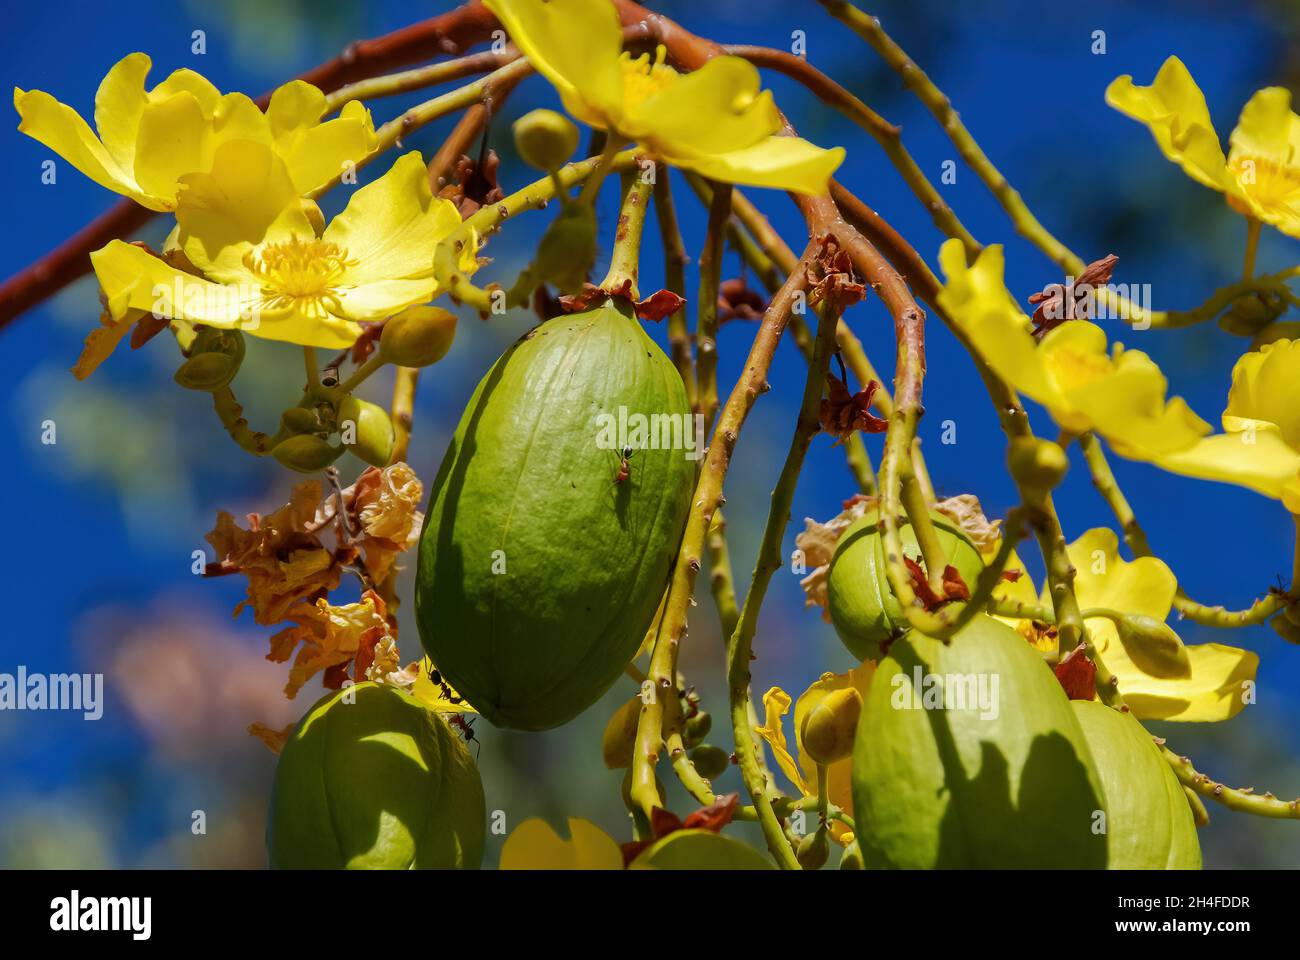 Close up view of the yellow flowers of the Cochlospermum or buttercup tree or silk cotton tree in bloom with some buds still unopened and ant crawling Stock Photo